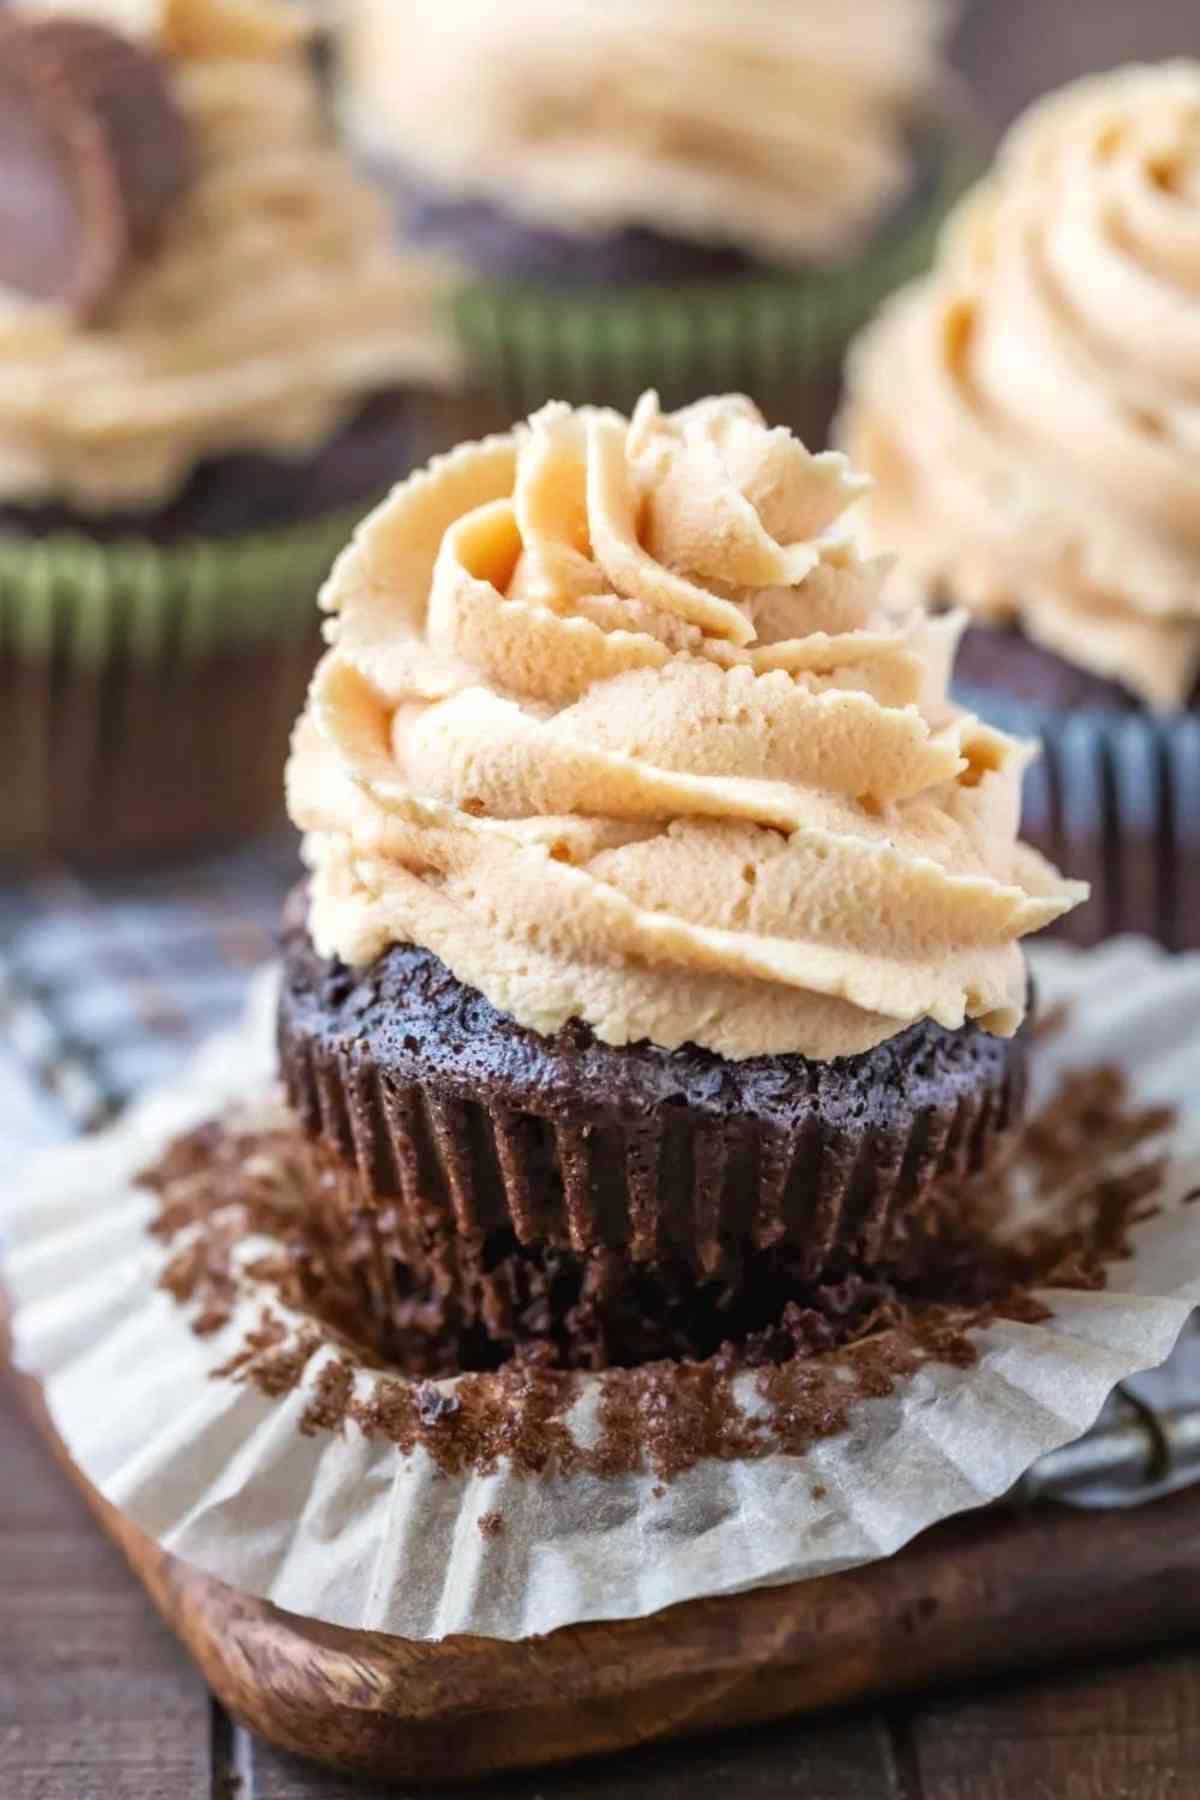 Peanut butter frosting on a chocolate cupcake.